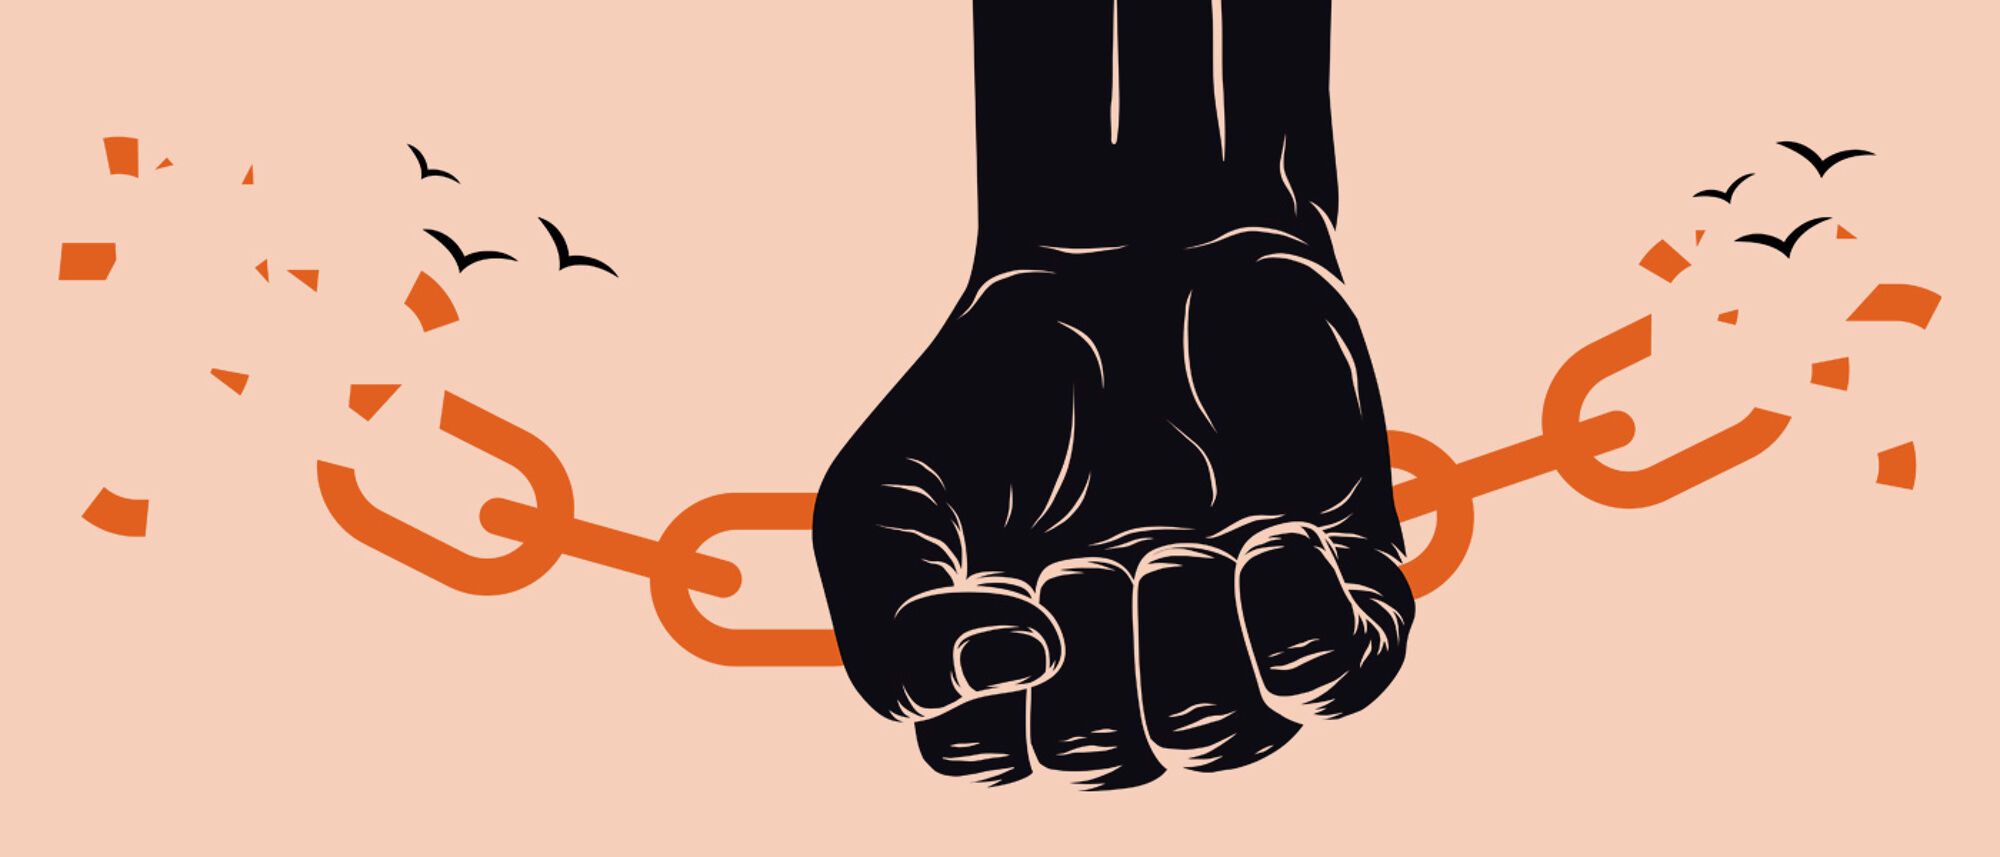 Graphic of a fist breaking a chain